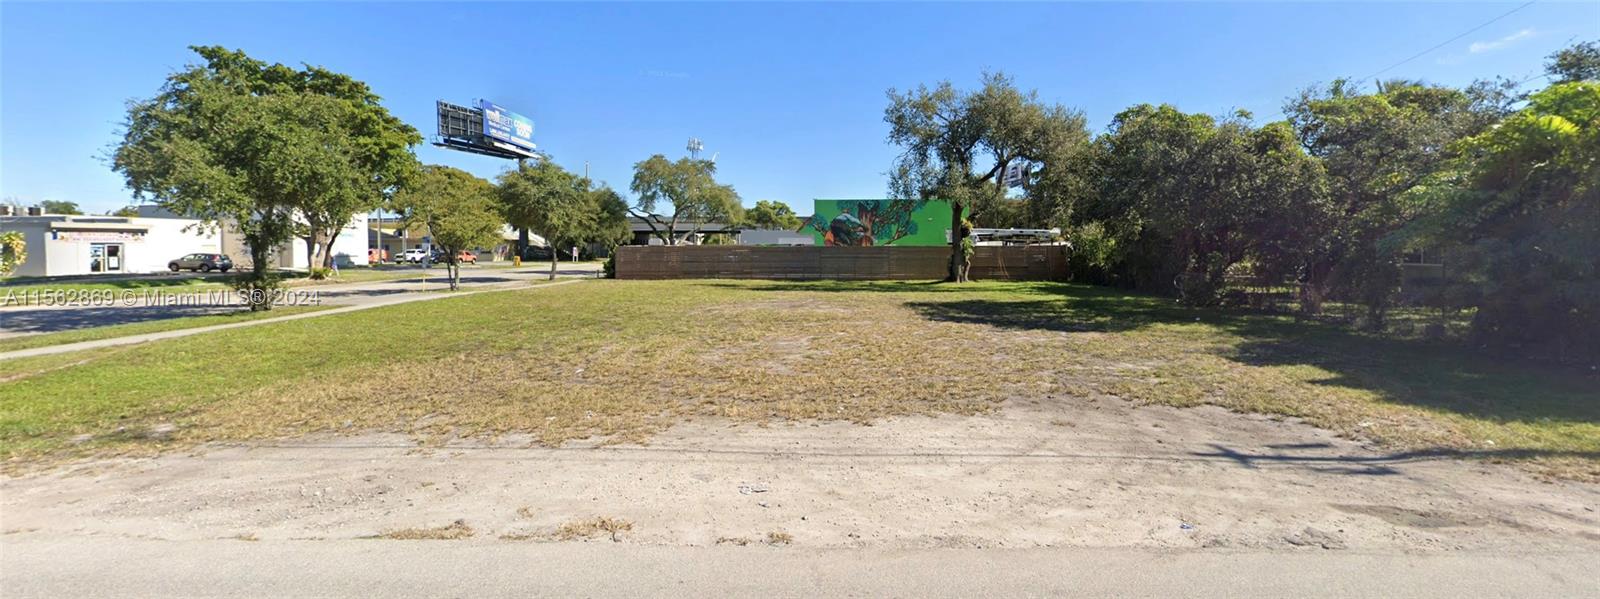 63  N Ave  For Sale A11562869, FL